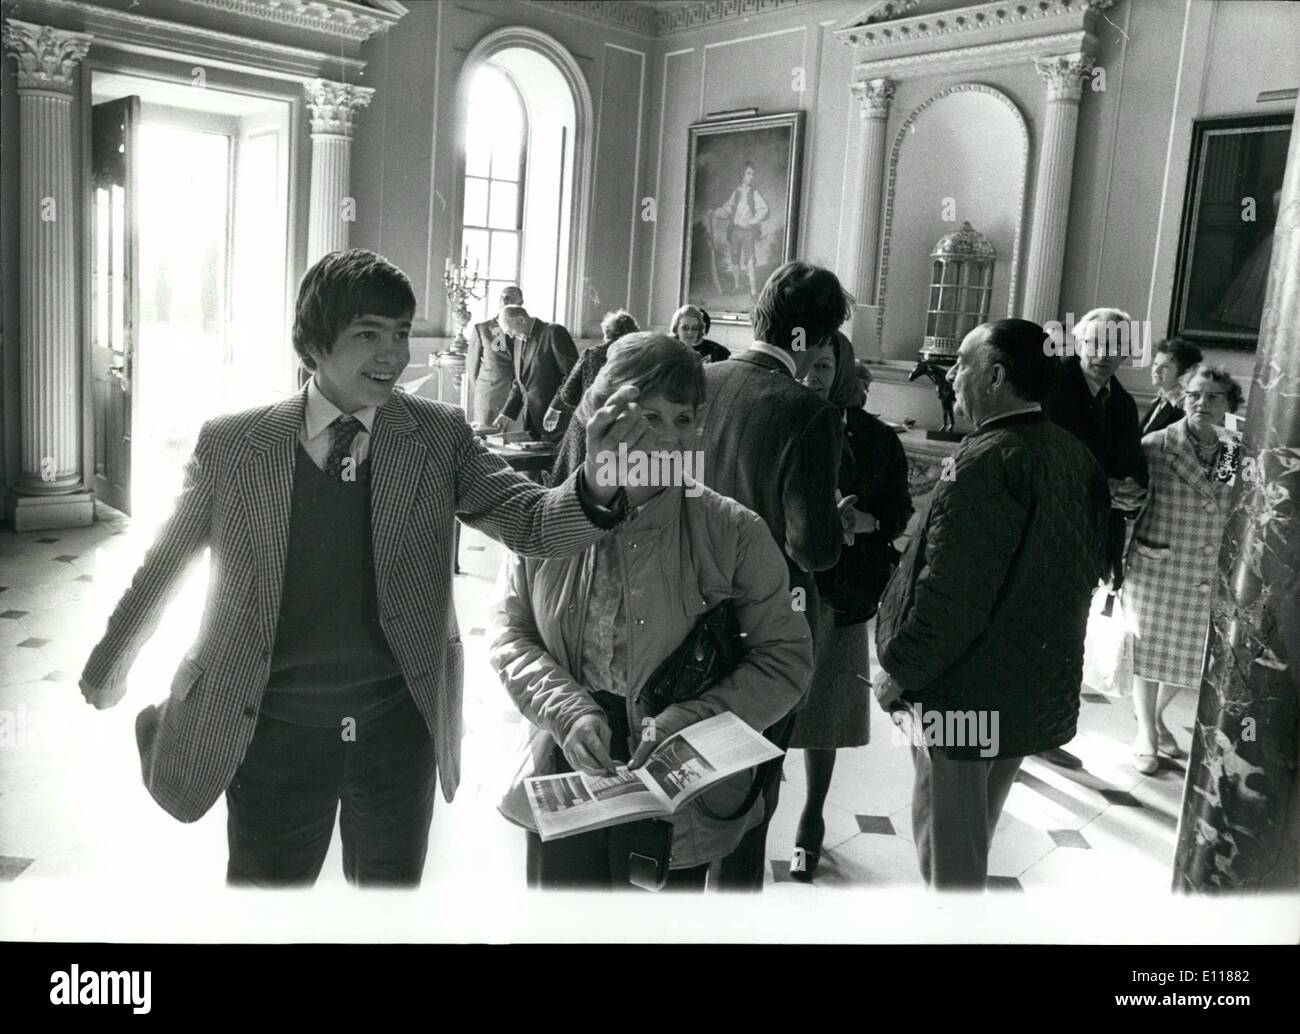 Apr. 04, 1976 - Chicheley Hall Opens To The Public: Nicholas Beatty (15), an Eton schoolboy, welcoming the first visitors to the 18the century Chicheley hall, Newport Pagnell, Bucks, yesterday when the 40 room stately home, left to him on trust by his father, the 2nd Earl Beatty, was opened with a 40 pence entrance fee and as season lasting until October, 30,000 visitors are expected. Stock Photo